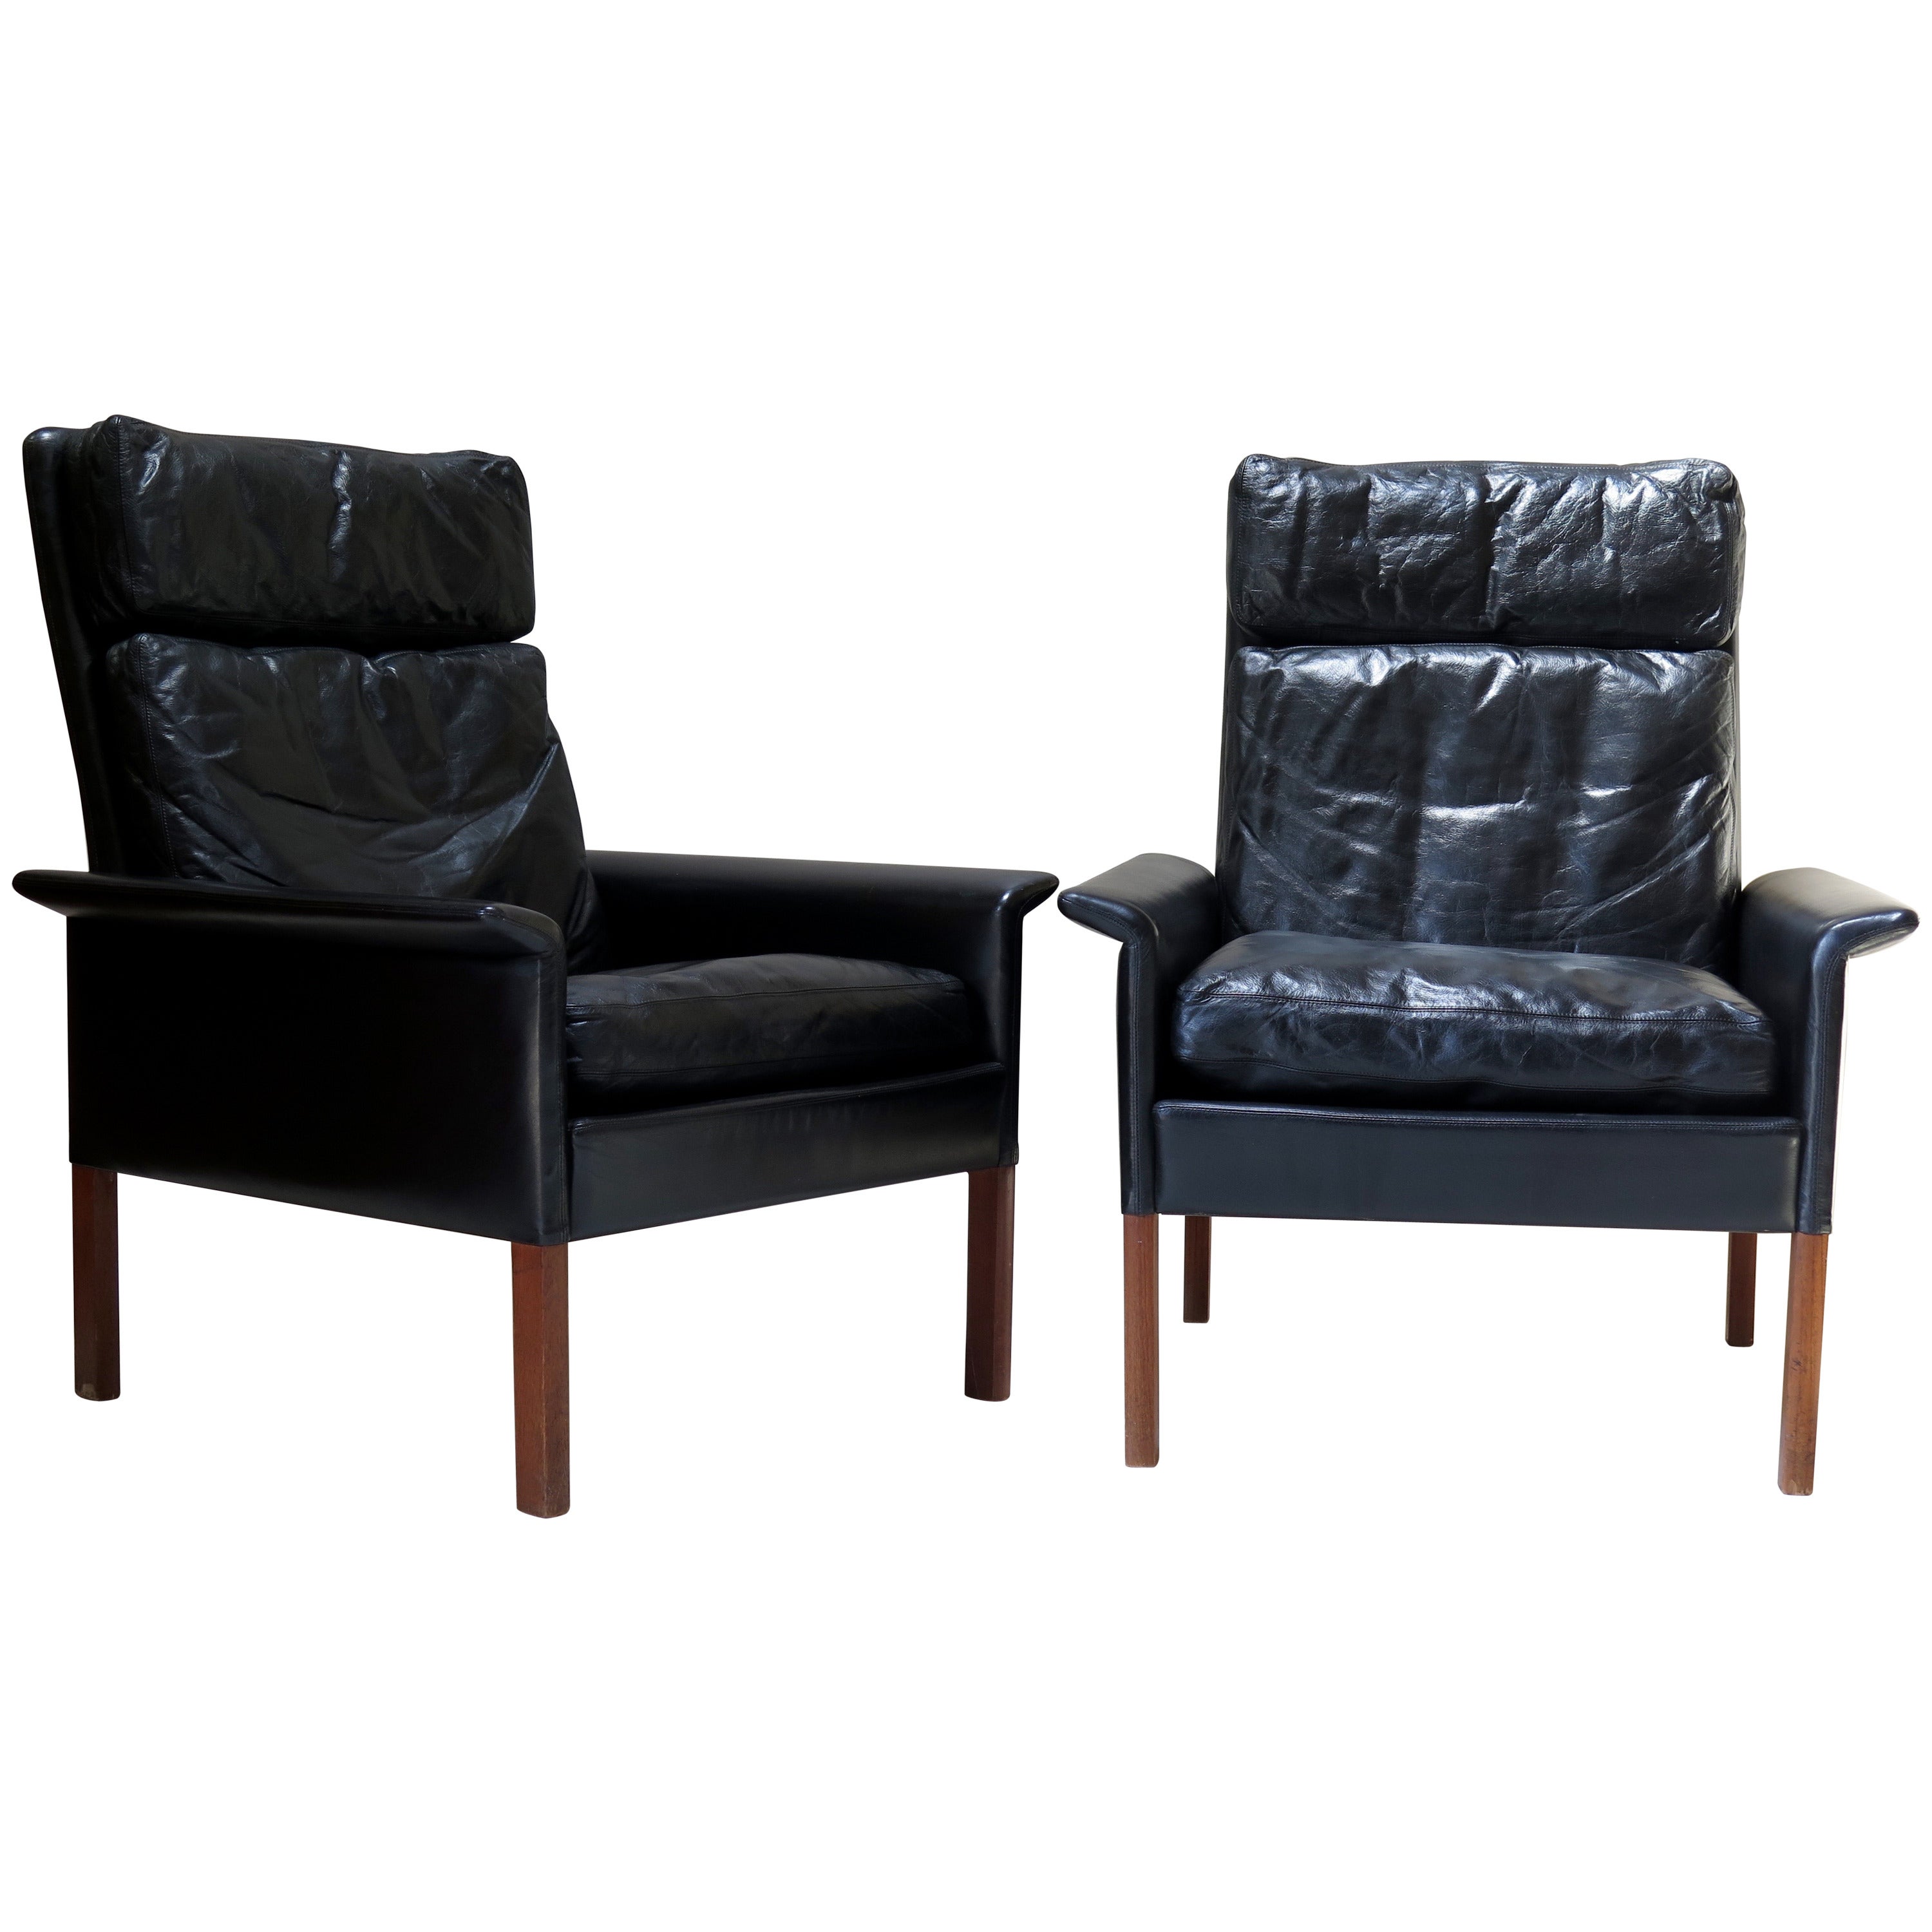 Pair of Hans Olsen Leather & Rosewood Armchairs - Denmark, Circa 1960s For Sale